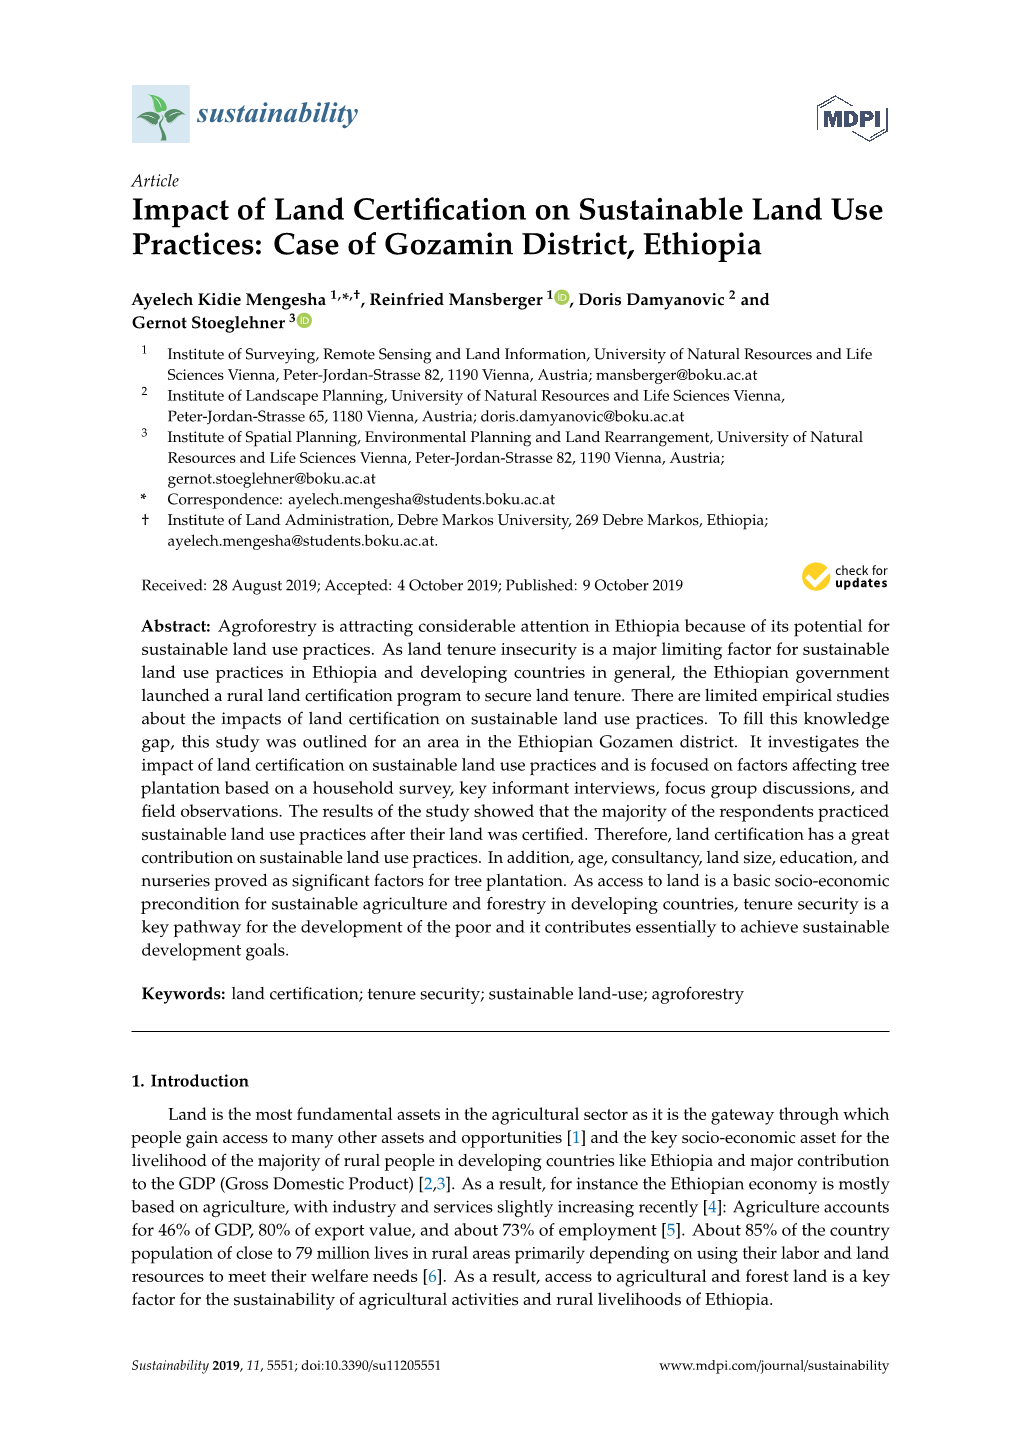 Impact of Land Certification on Sustainable Land Use Practices: Case of Gozamin District, Ethiopia